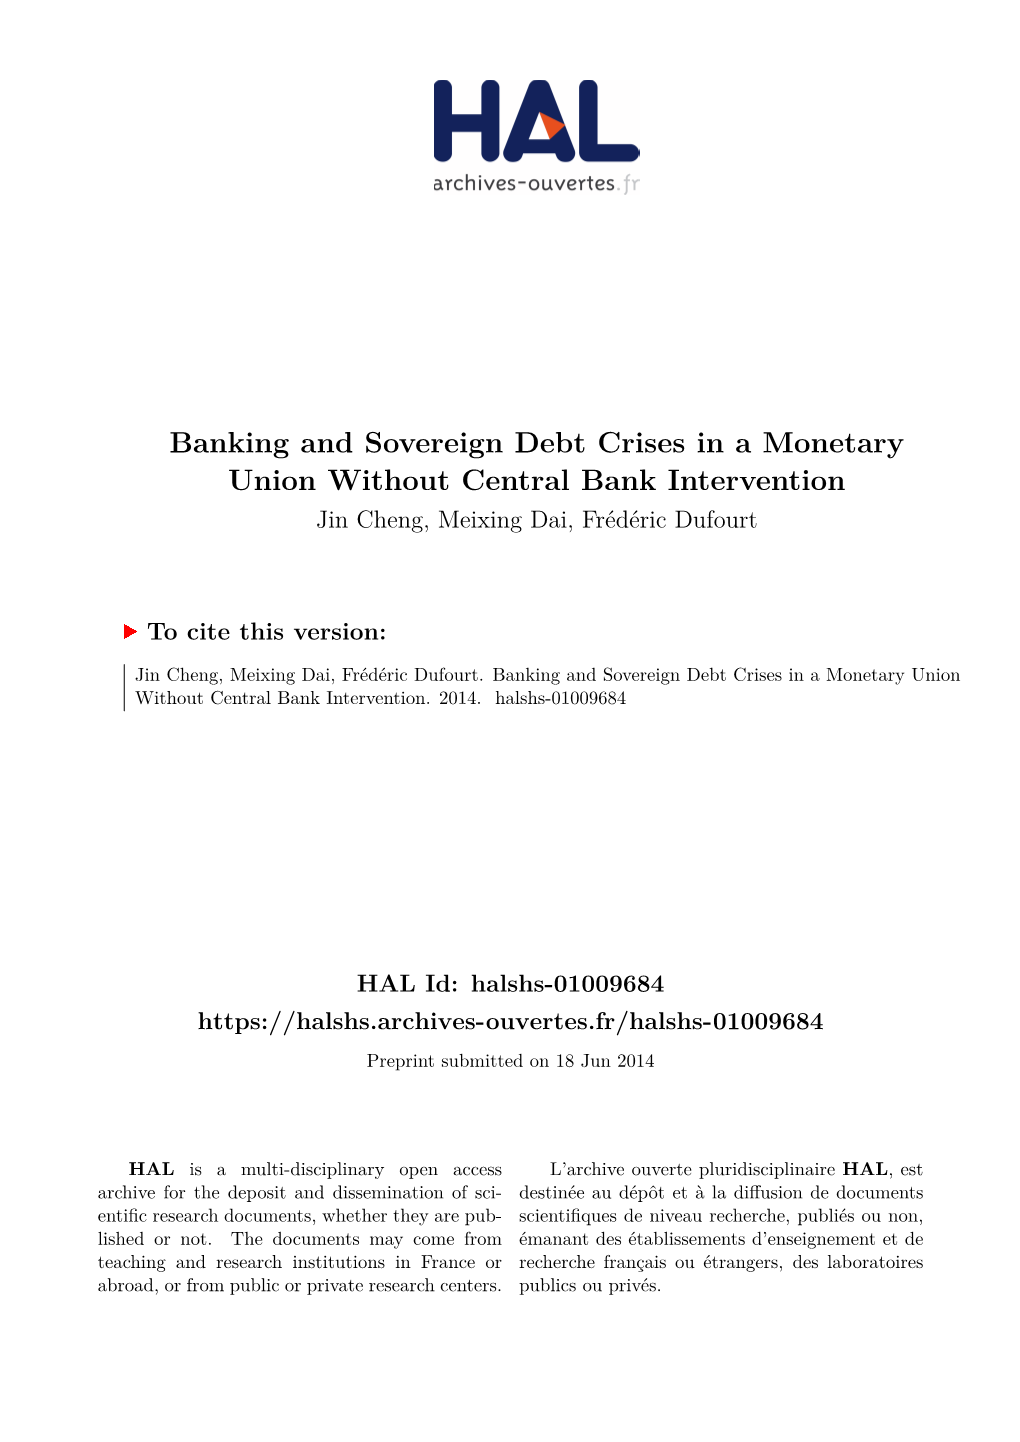 Banking and Sovereign Debt Crises in a Monetary Union Without Central Bank Intervention Jin Cheng, Meixing Dai, Frédéric Dufourt